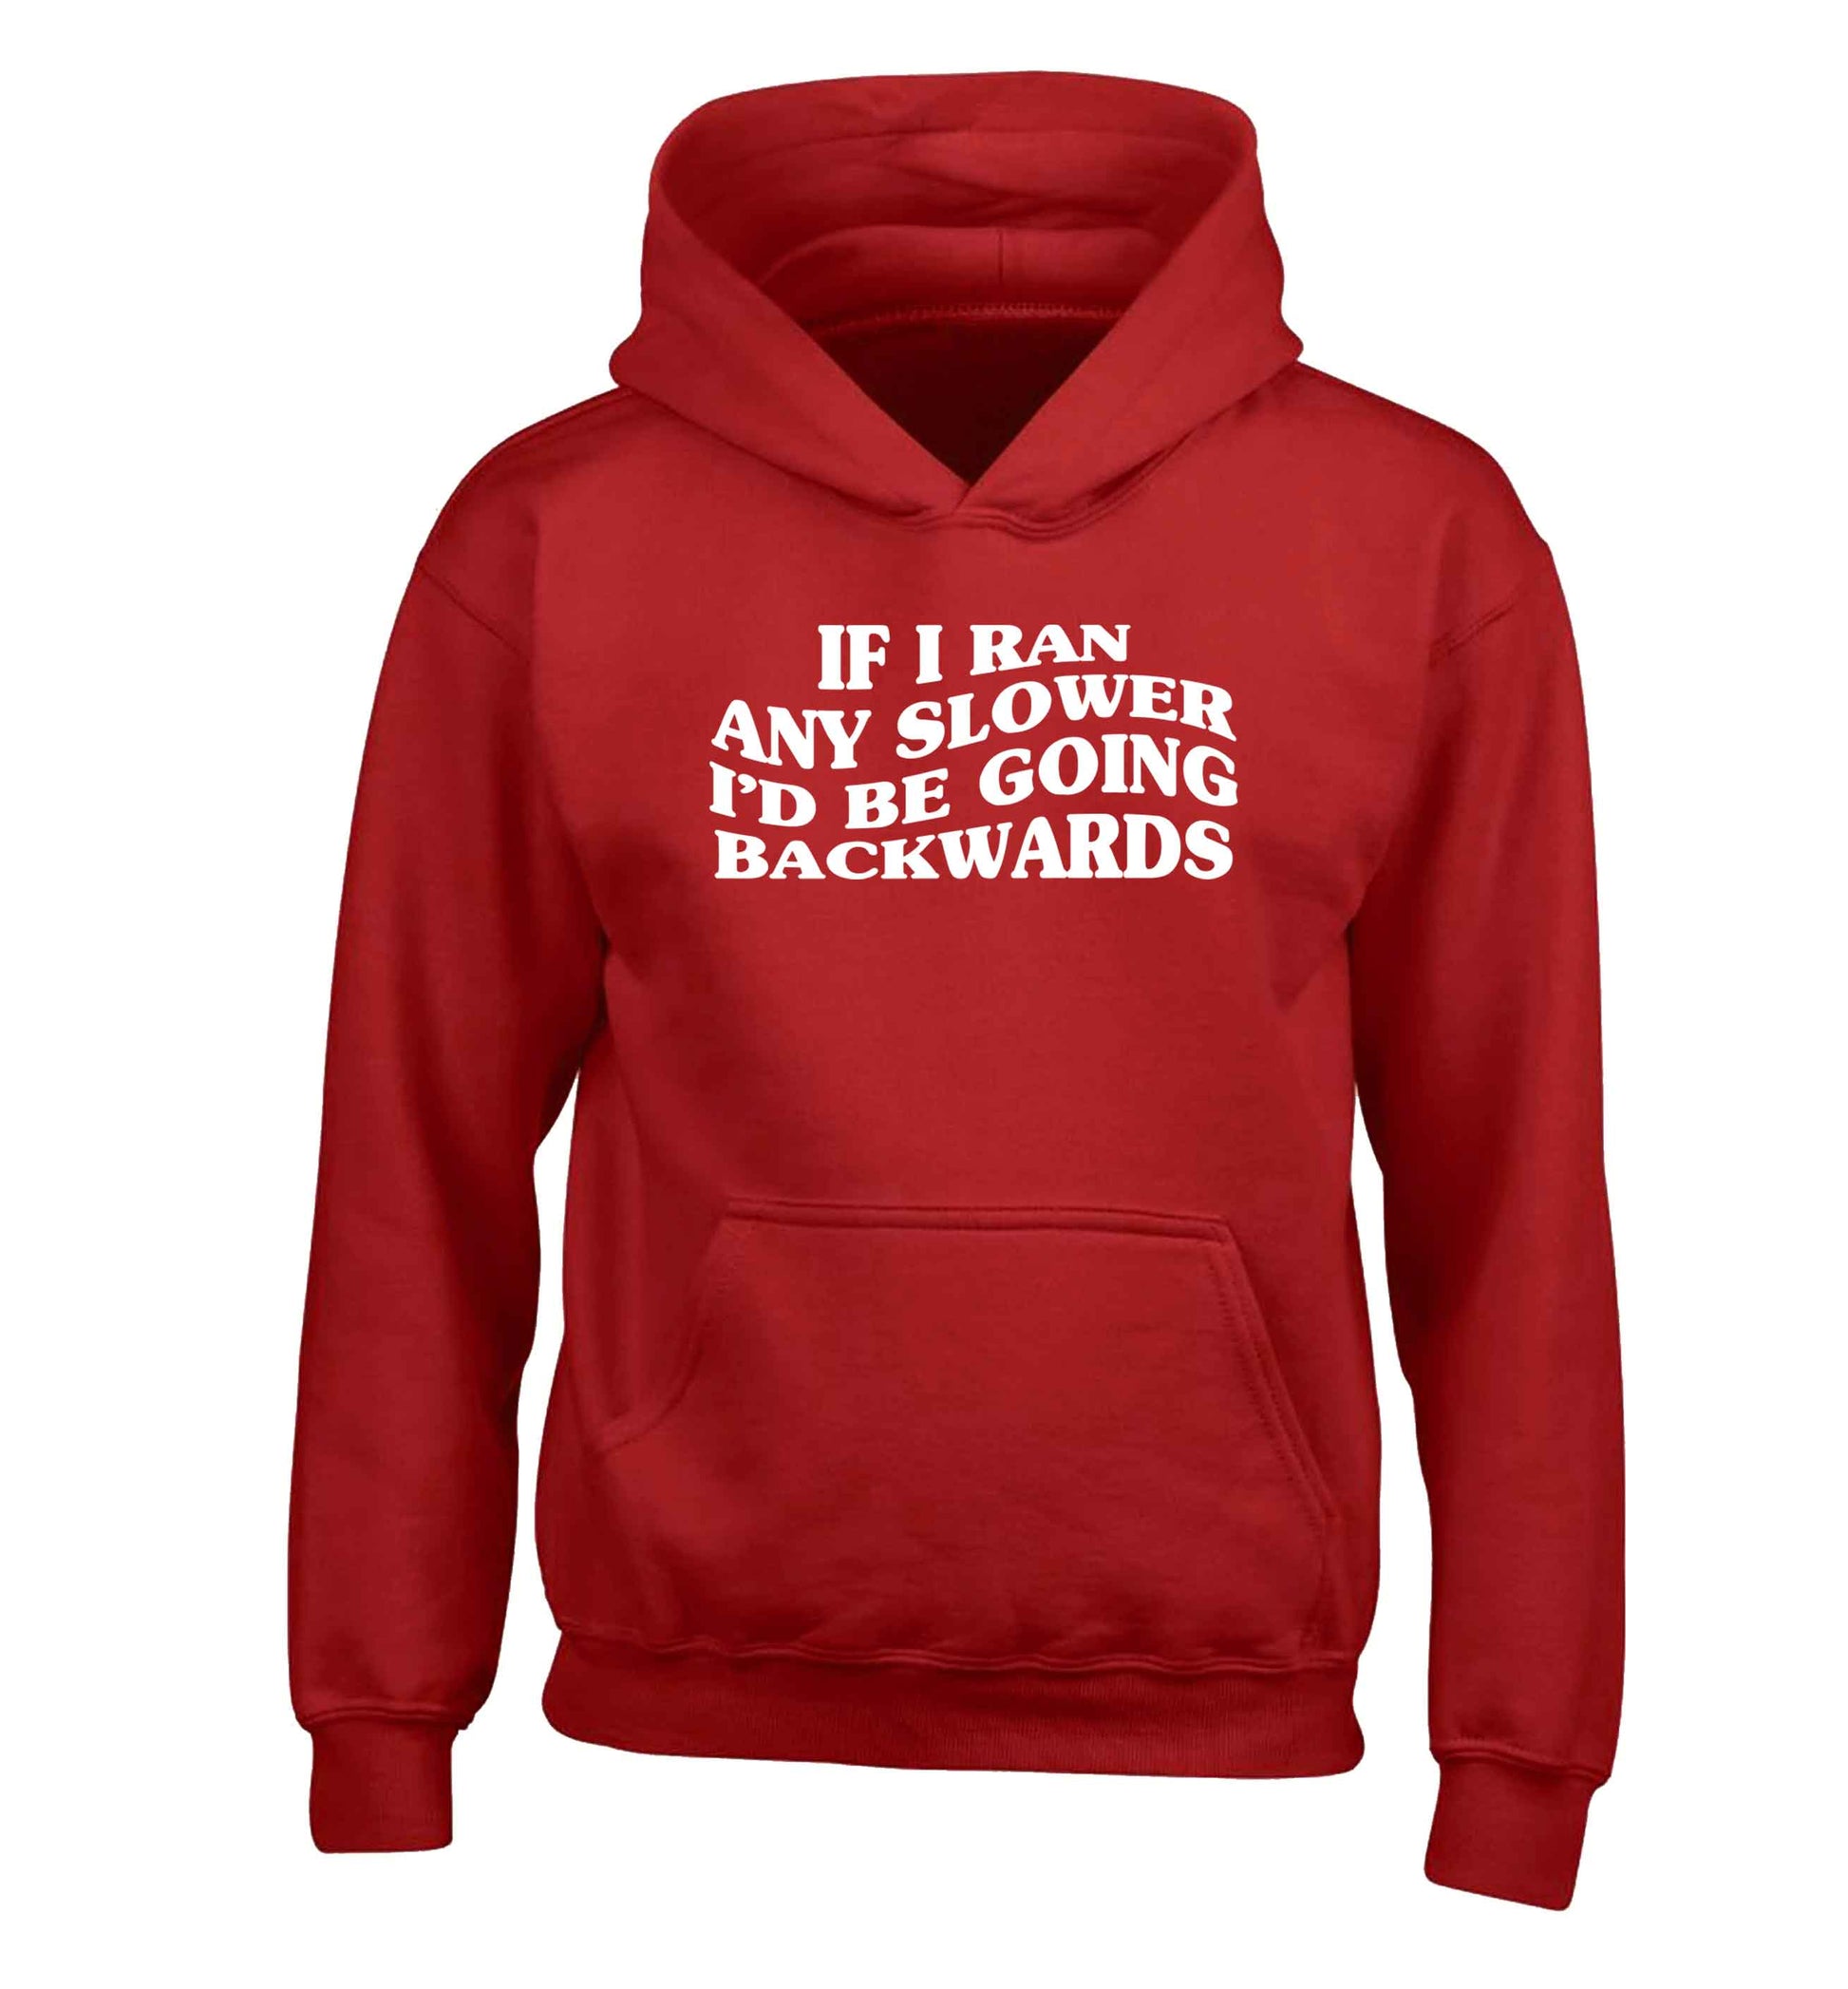 If I ran any slower I'd be going backwards children's red hoodie 12-13 Years